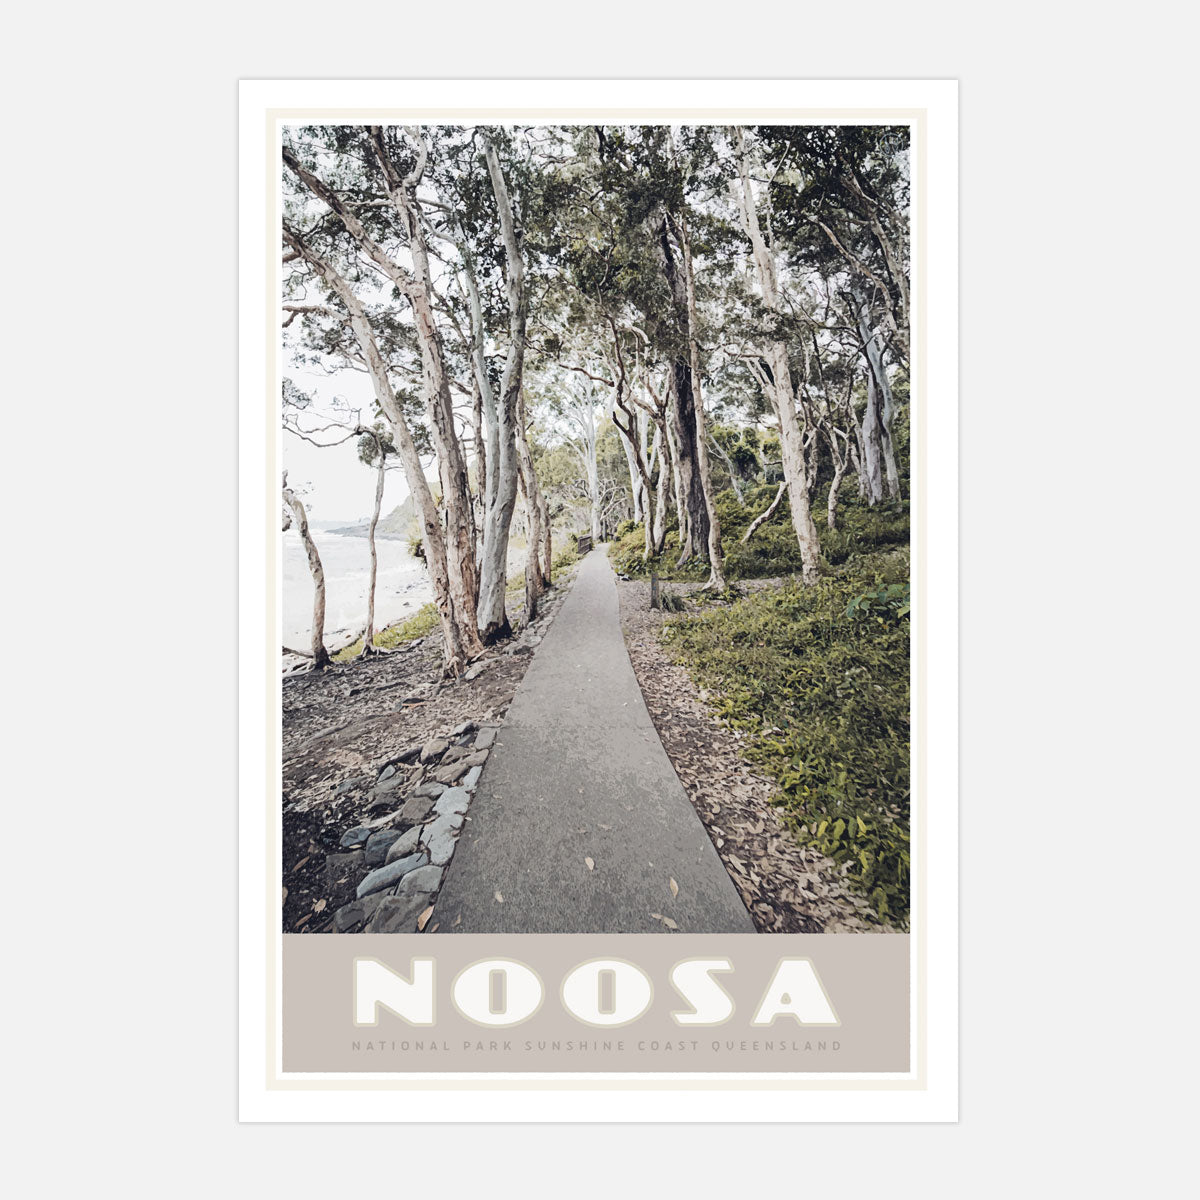 Noosa vintage travel style print by places we luv